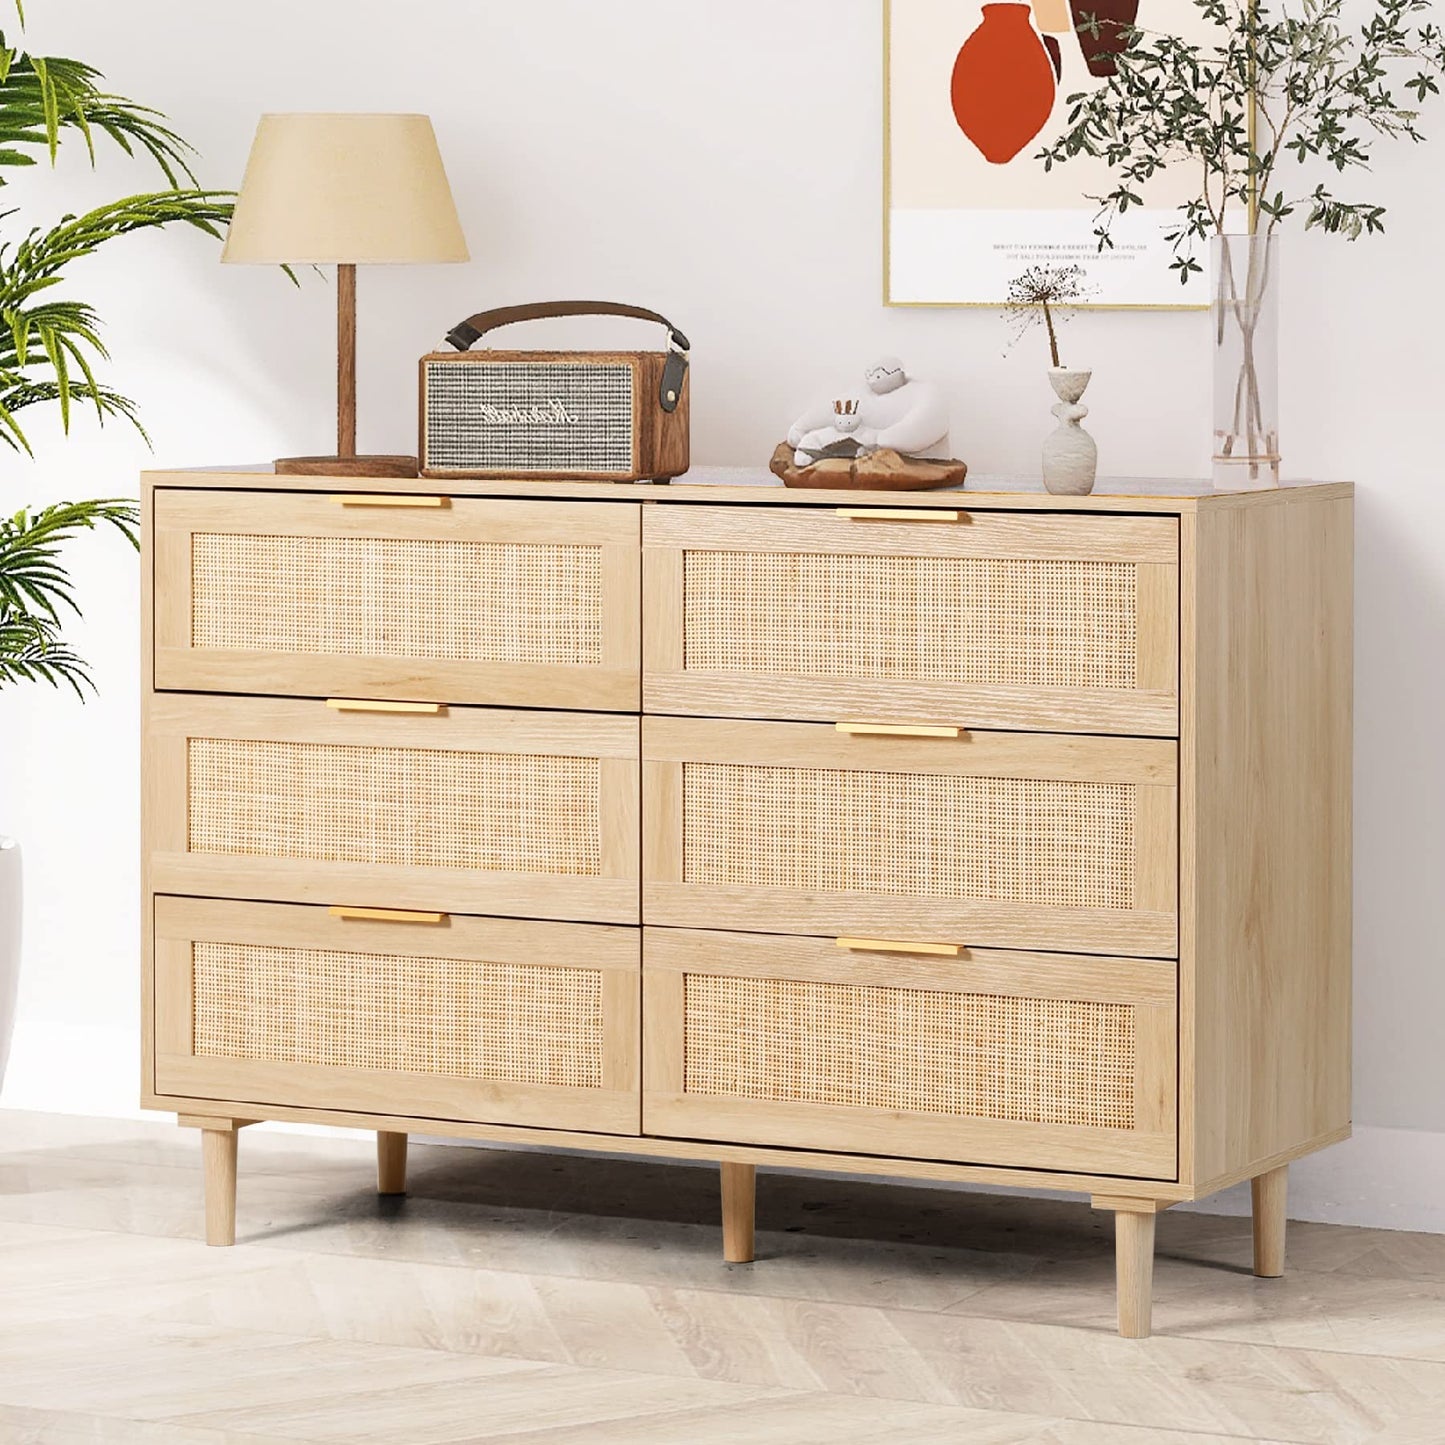 FUQARHY Rattan Dresser for Bedroom, Modern 6 Drawer Double Dresser with Gold Handles, Wood Storage Chest of Drawers for Bedroom,Living Room,Hallway